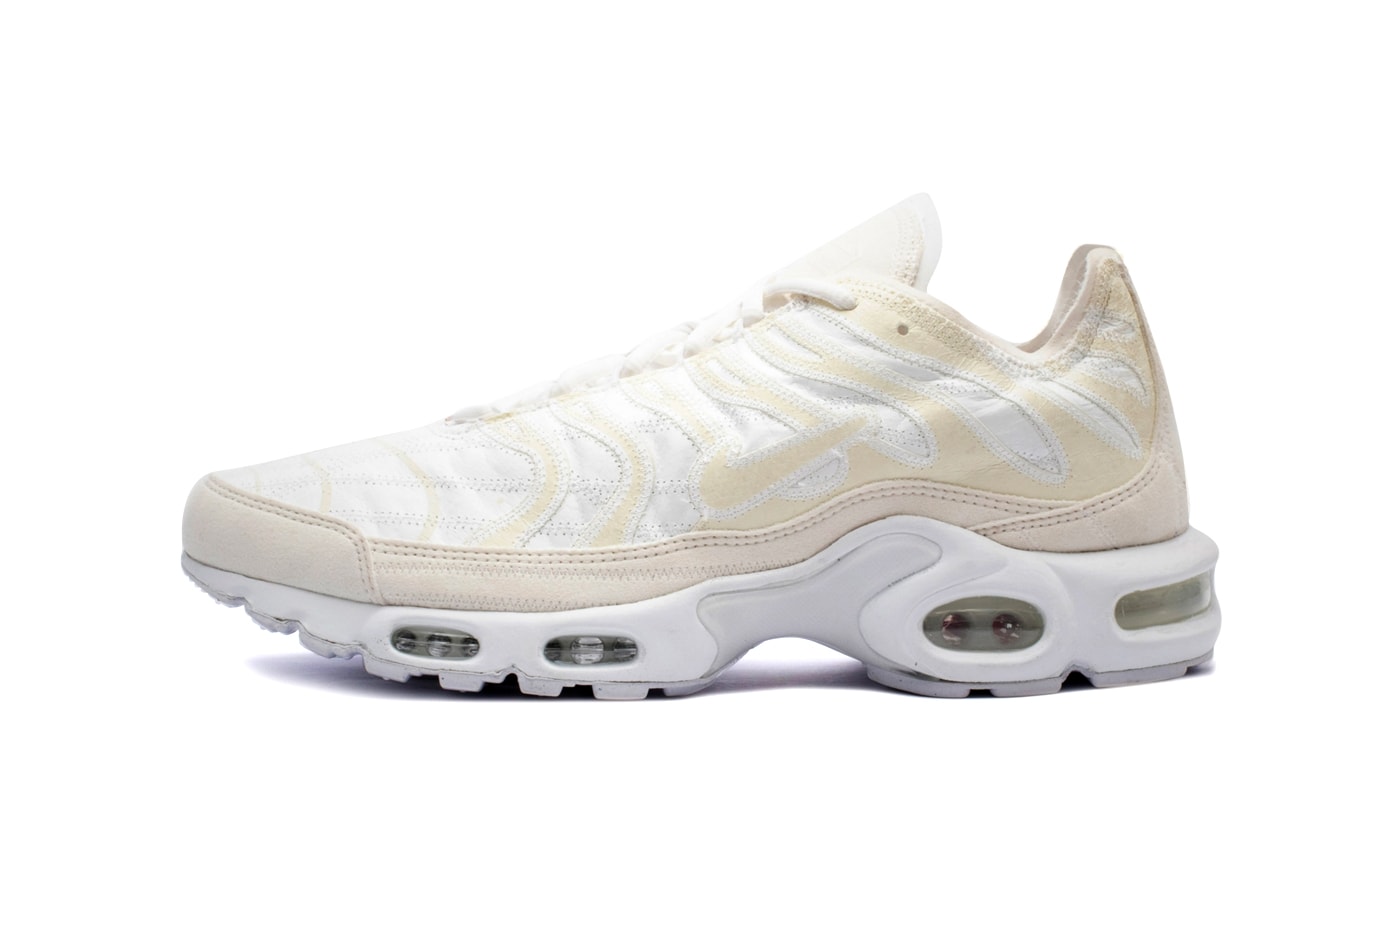 Nike Air Max Plus Deconstructed Beige White top stitching contrast white midsole air sole unit footwear sneaker tn check swoosh exposed upper